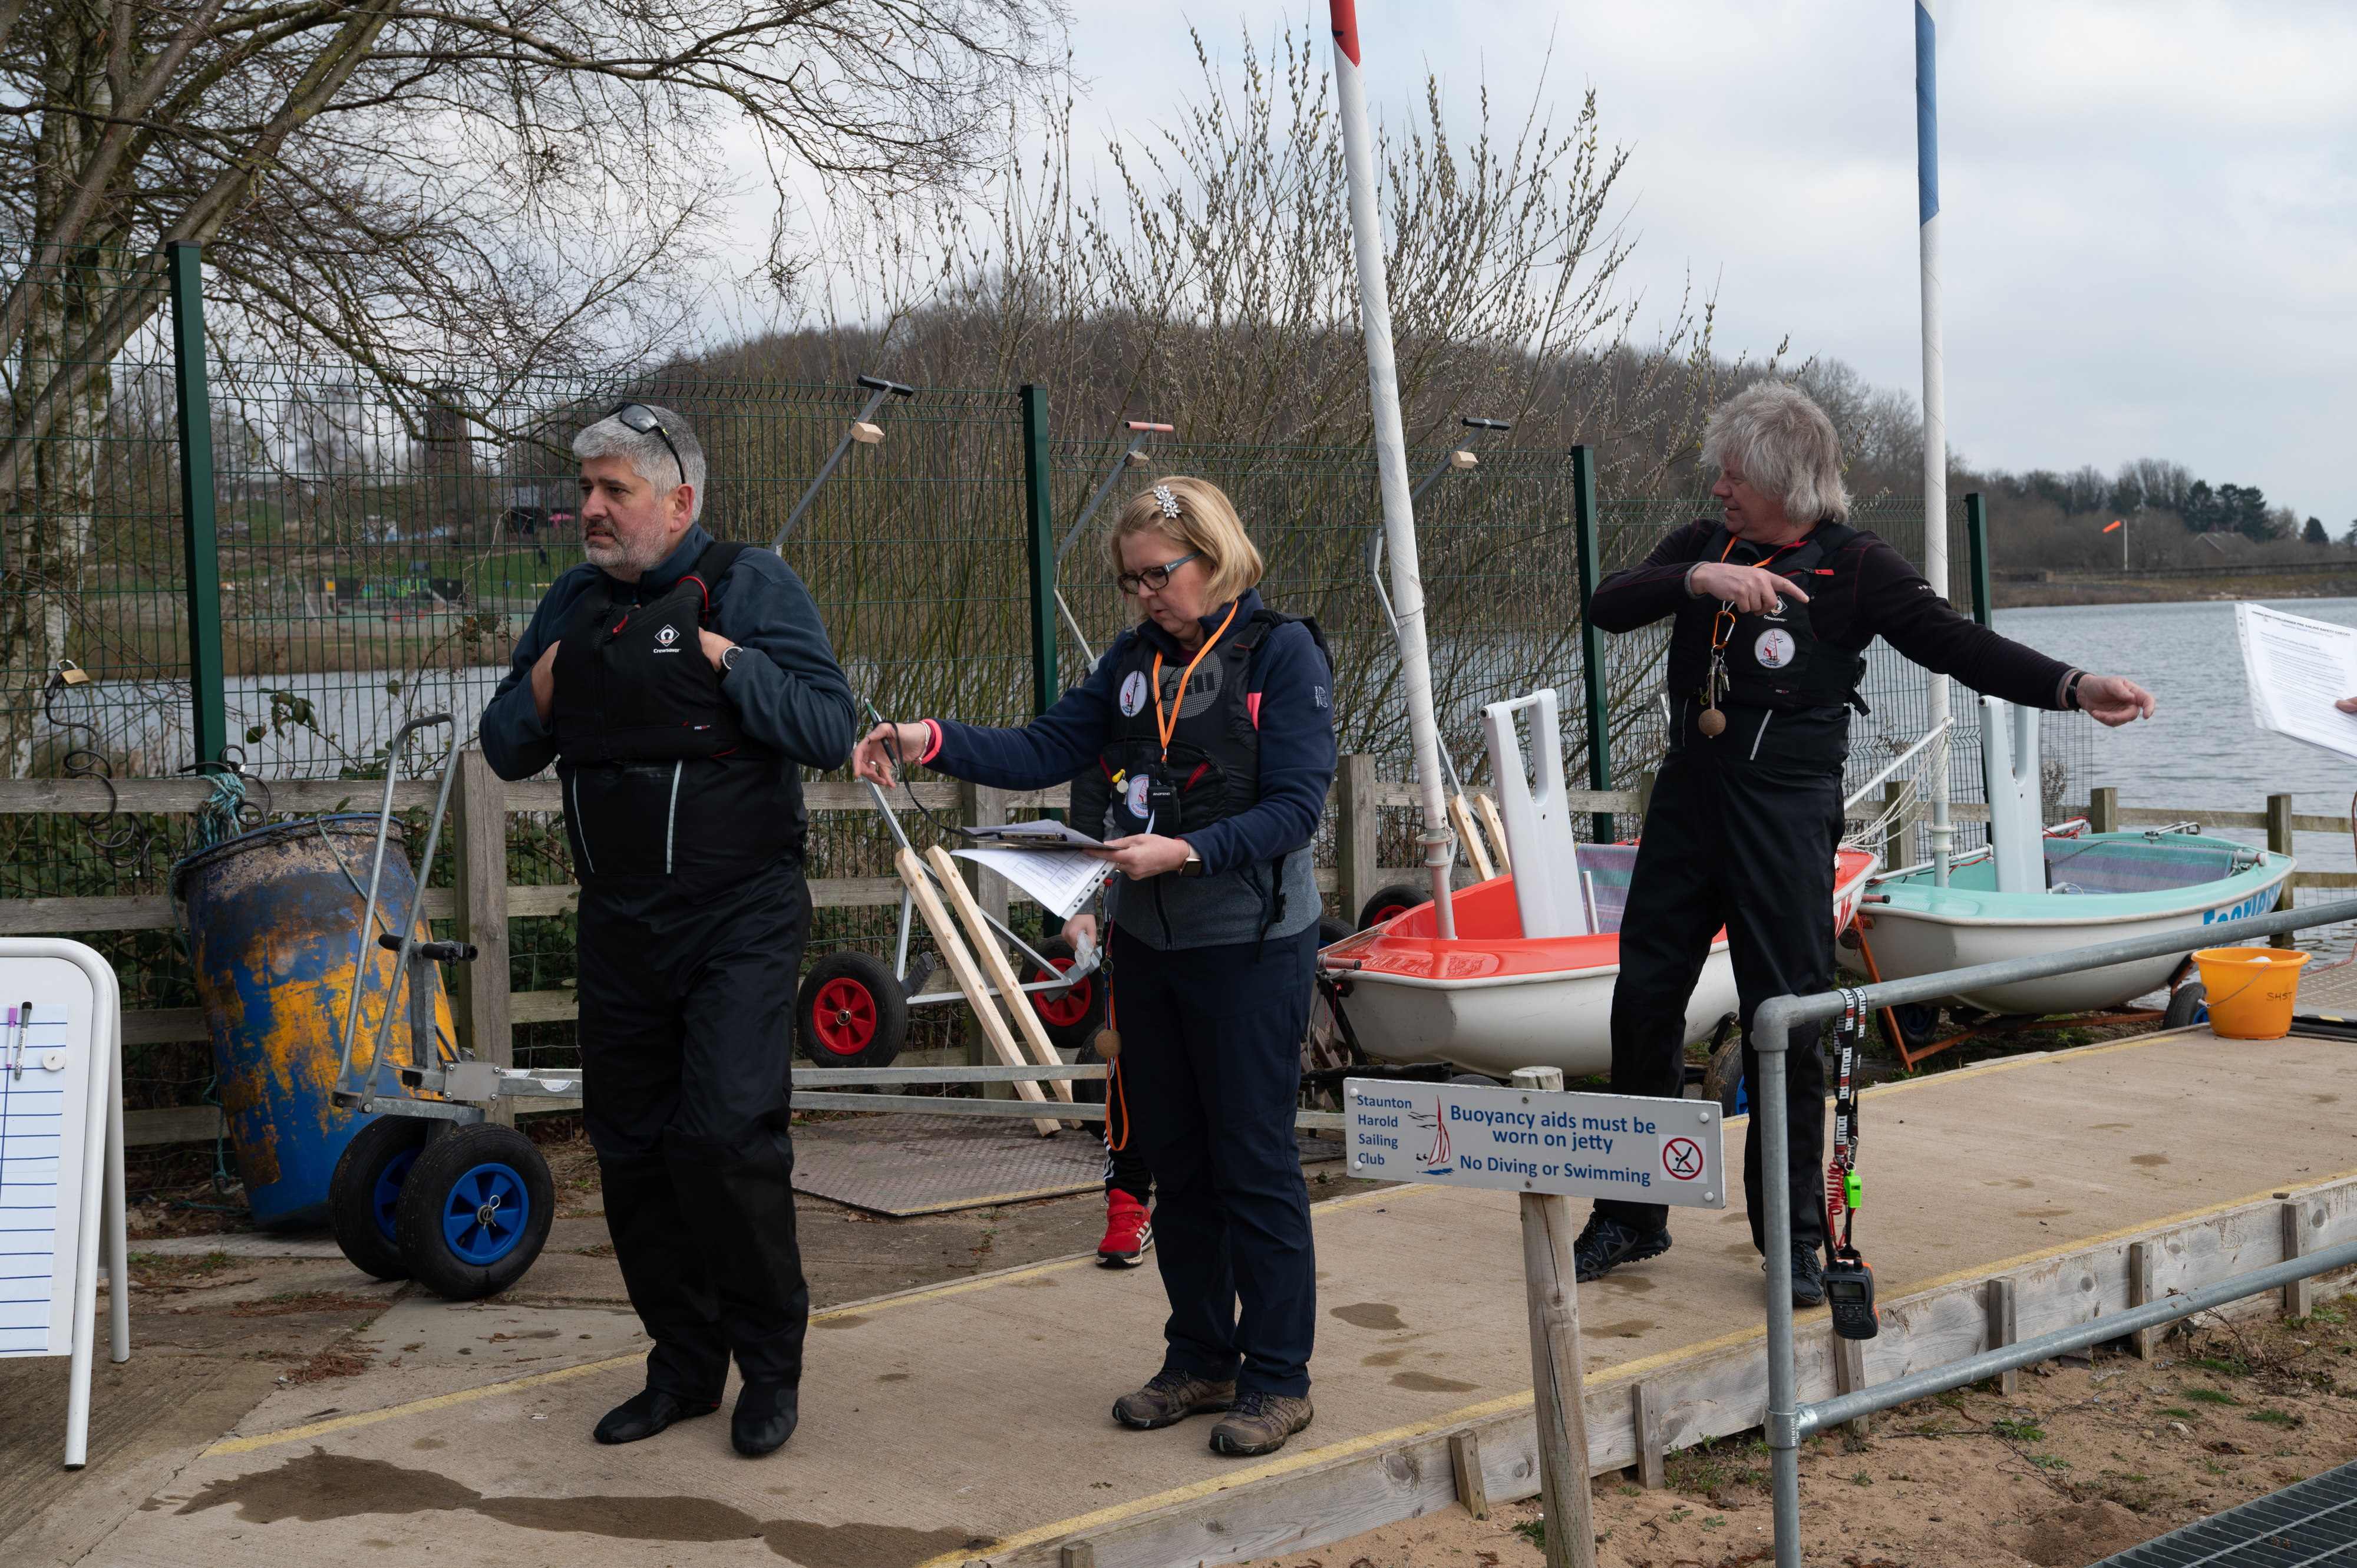 Sailability Session - Sunday 20th March 2022